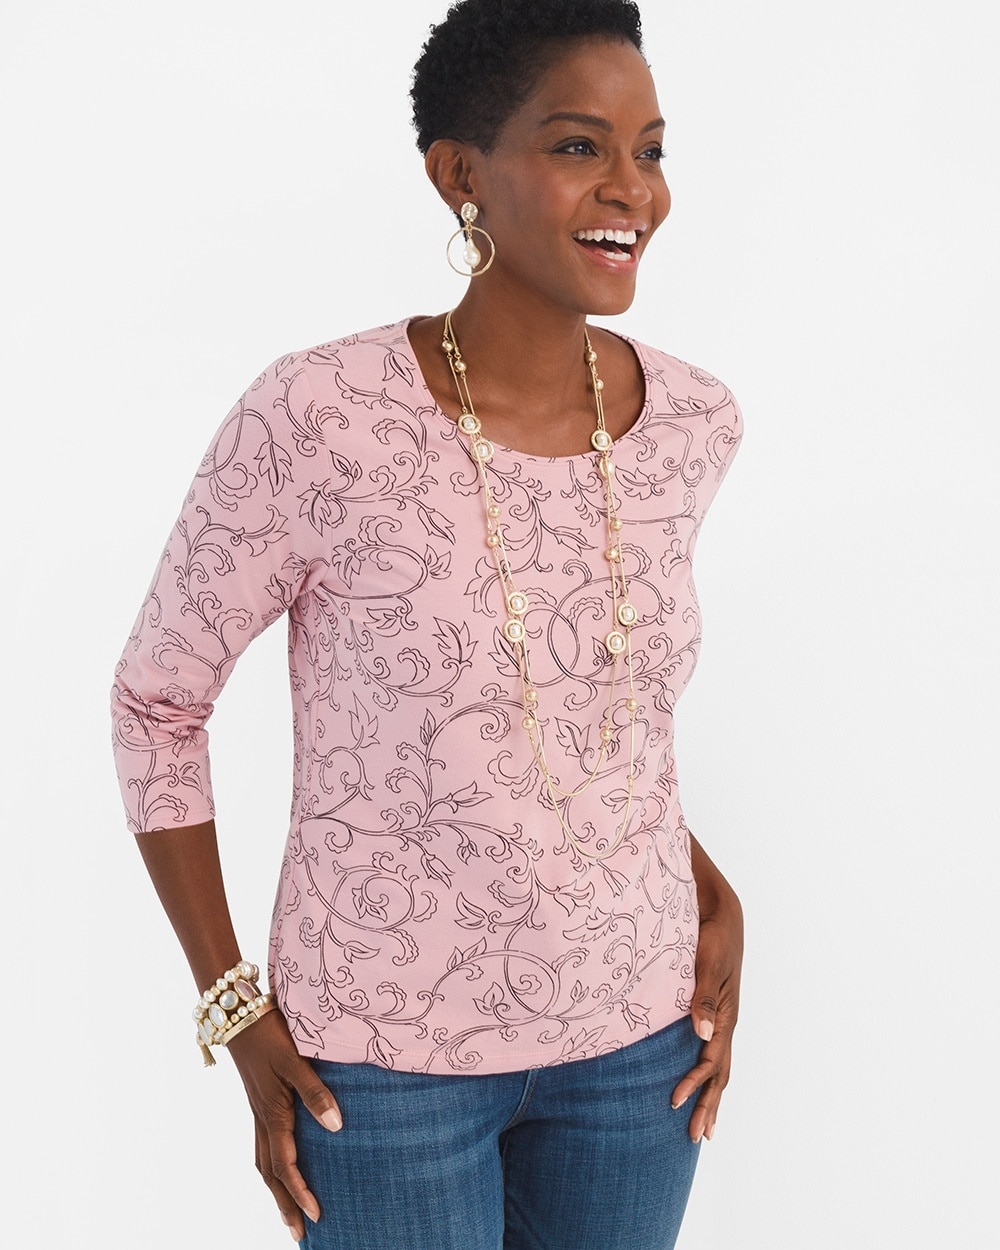 Living Beyond Breast Cancer Top